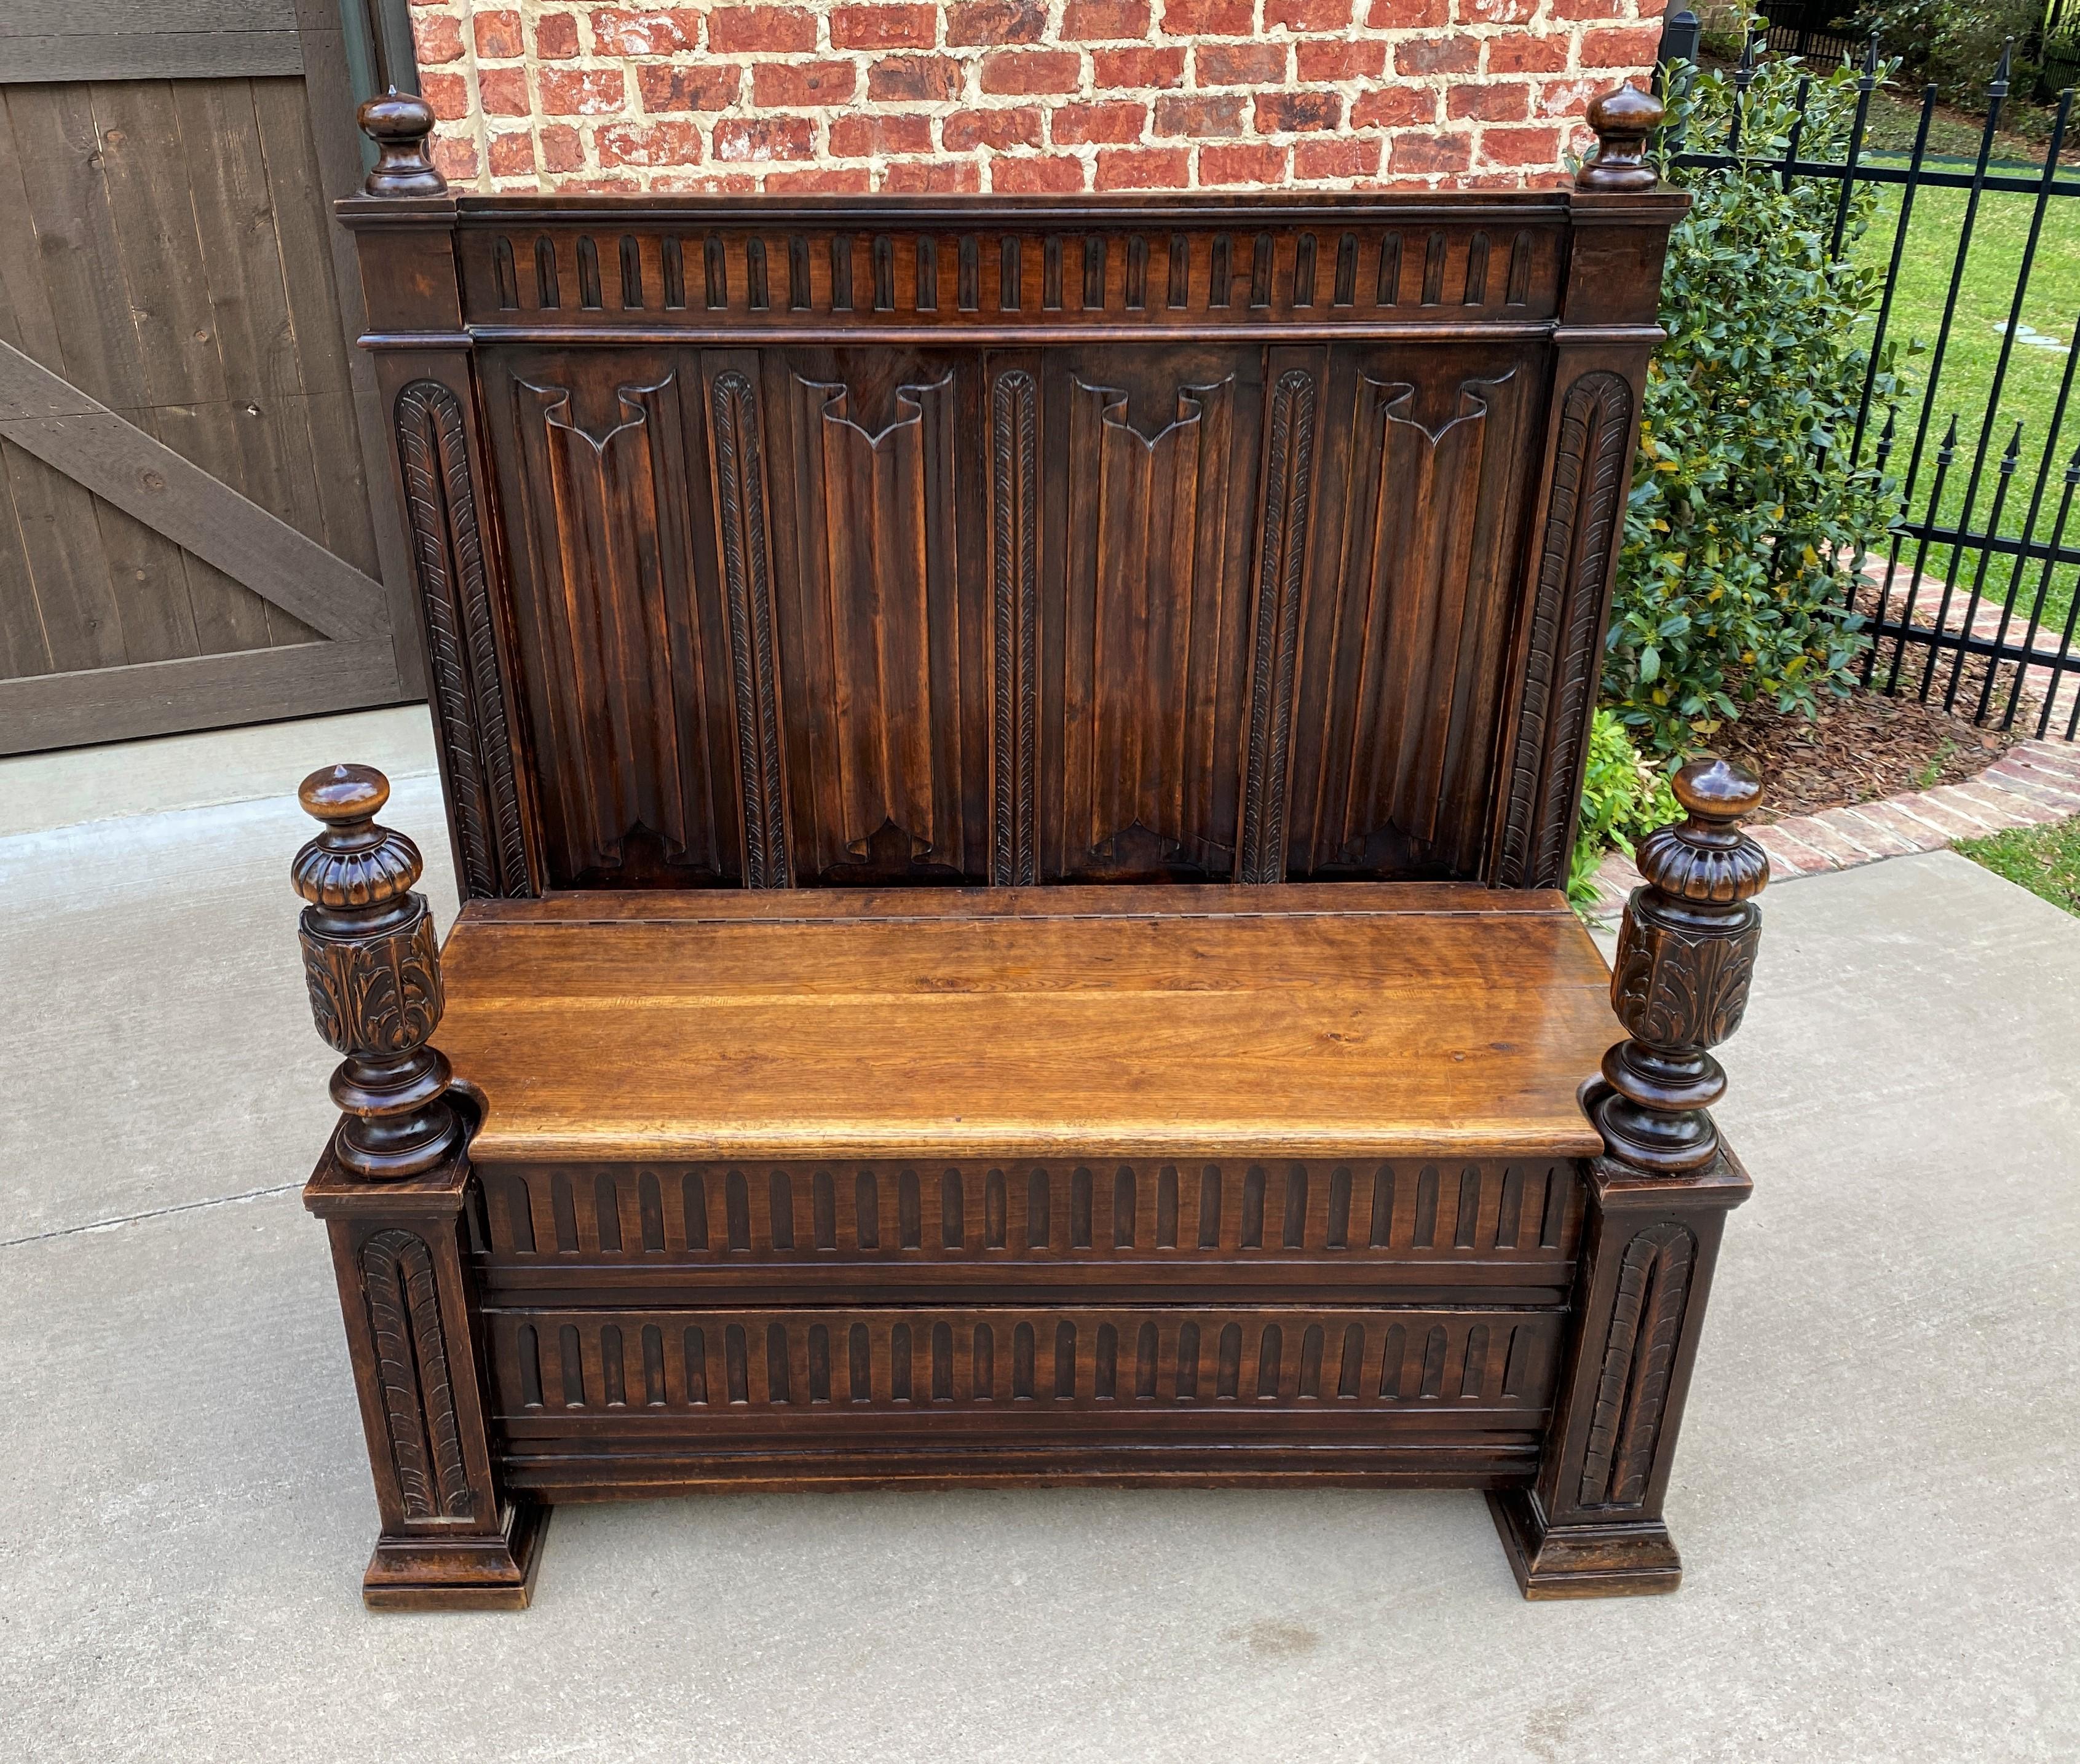 Antique French Bench Settee Gothic Revival Oak Lift Top Seat Storage Trunk 19C For Sale 7